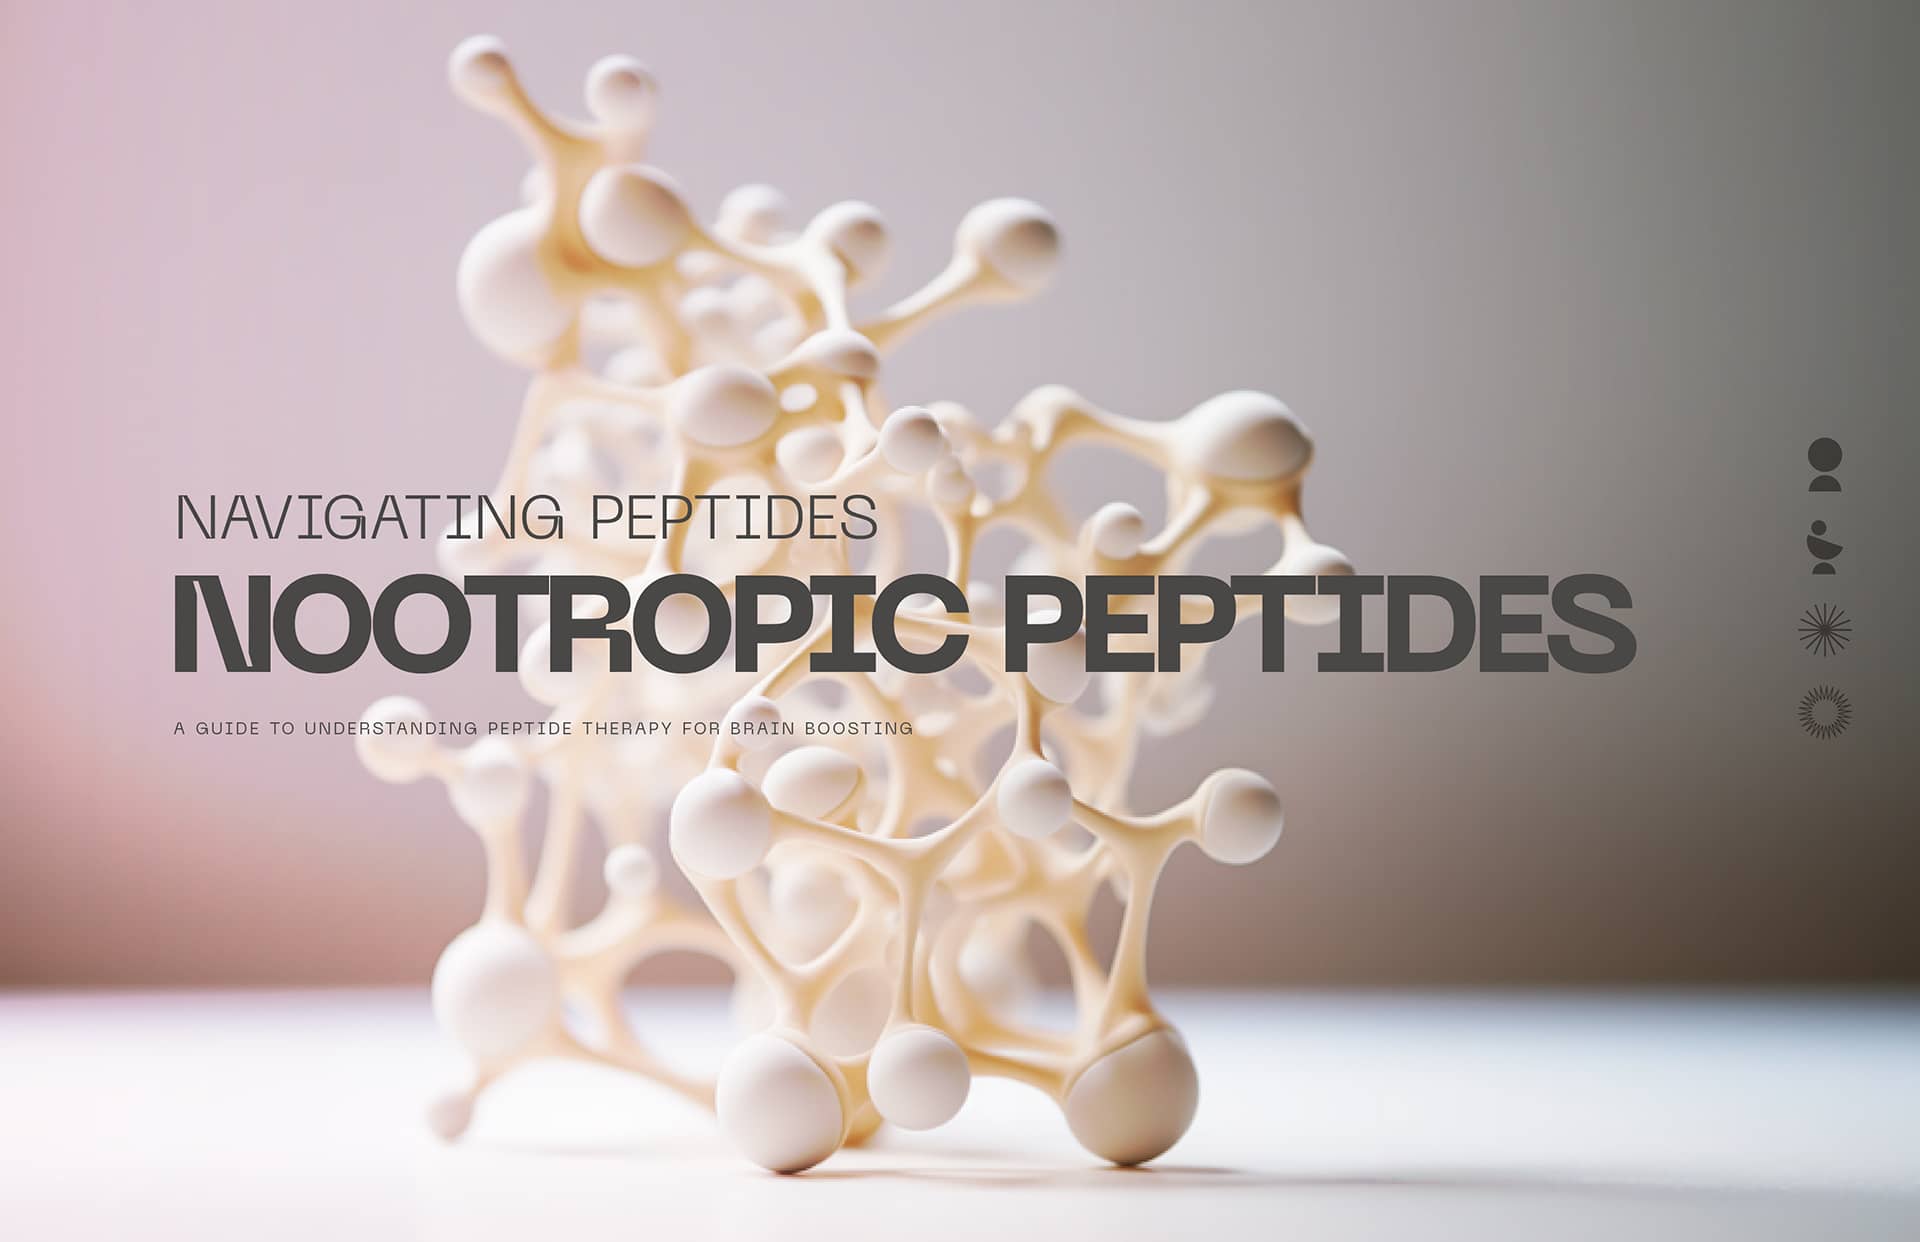 Nootropic peptides – what is the best